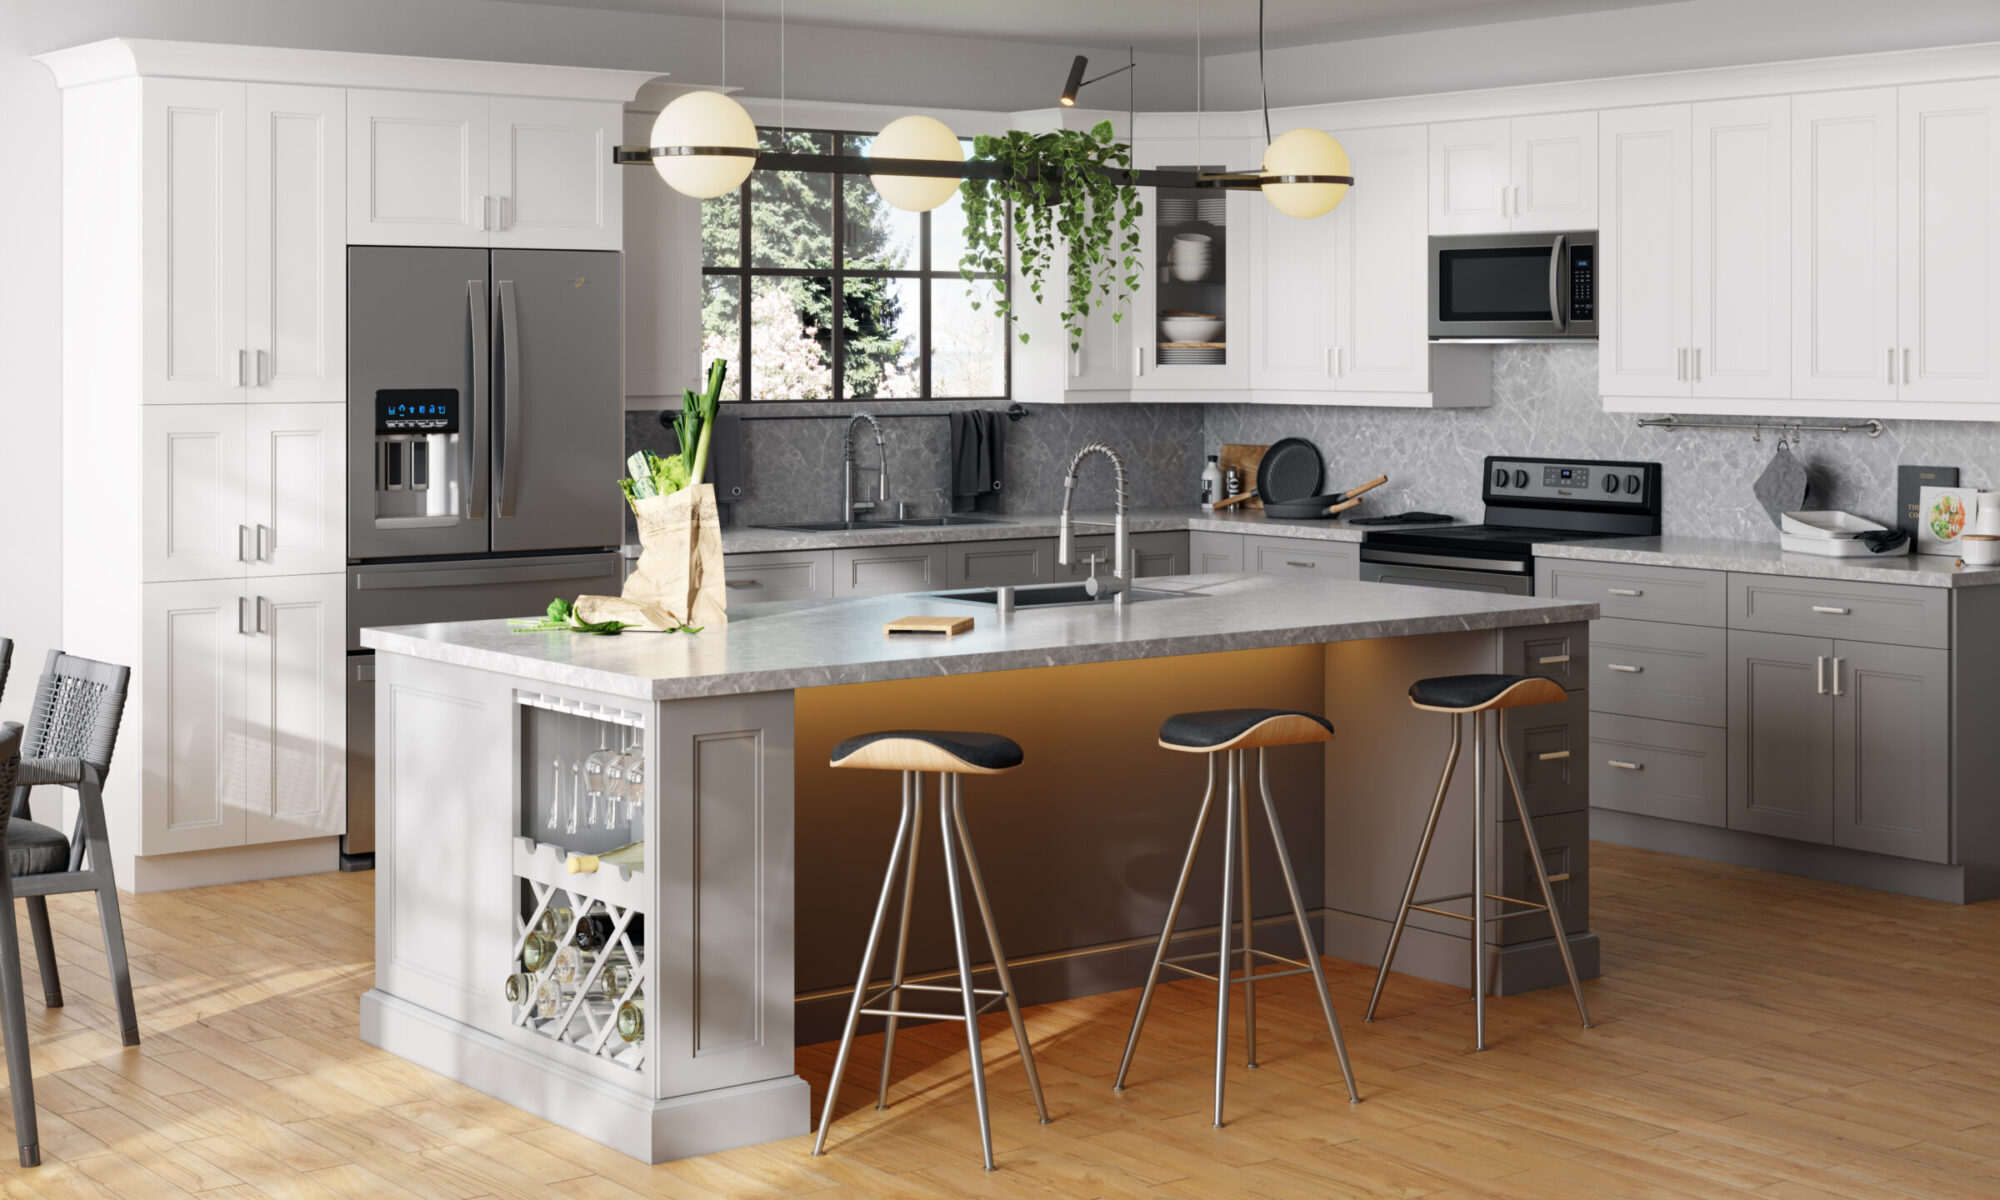 Todays Designer Kitchens cropped-cropped-SSW-and-FG-kitchen-1-scaled-1-1-2000x1200 Kitchen Cabinets 